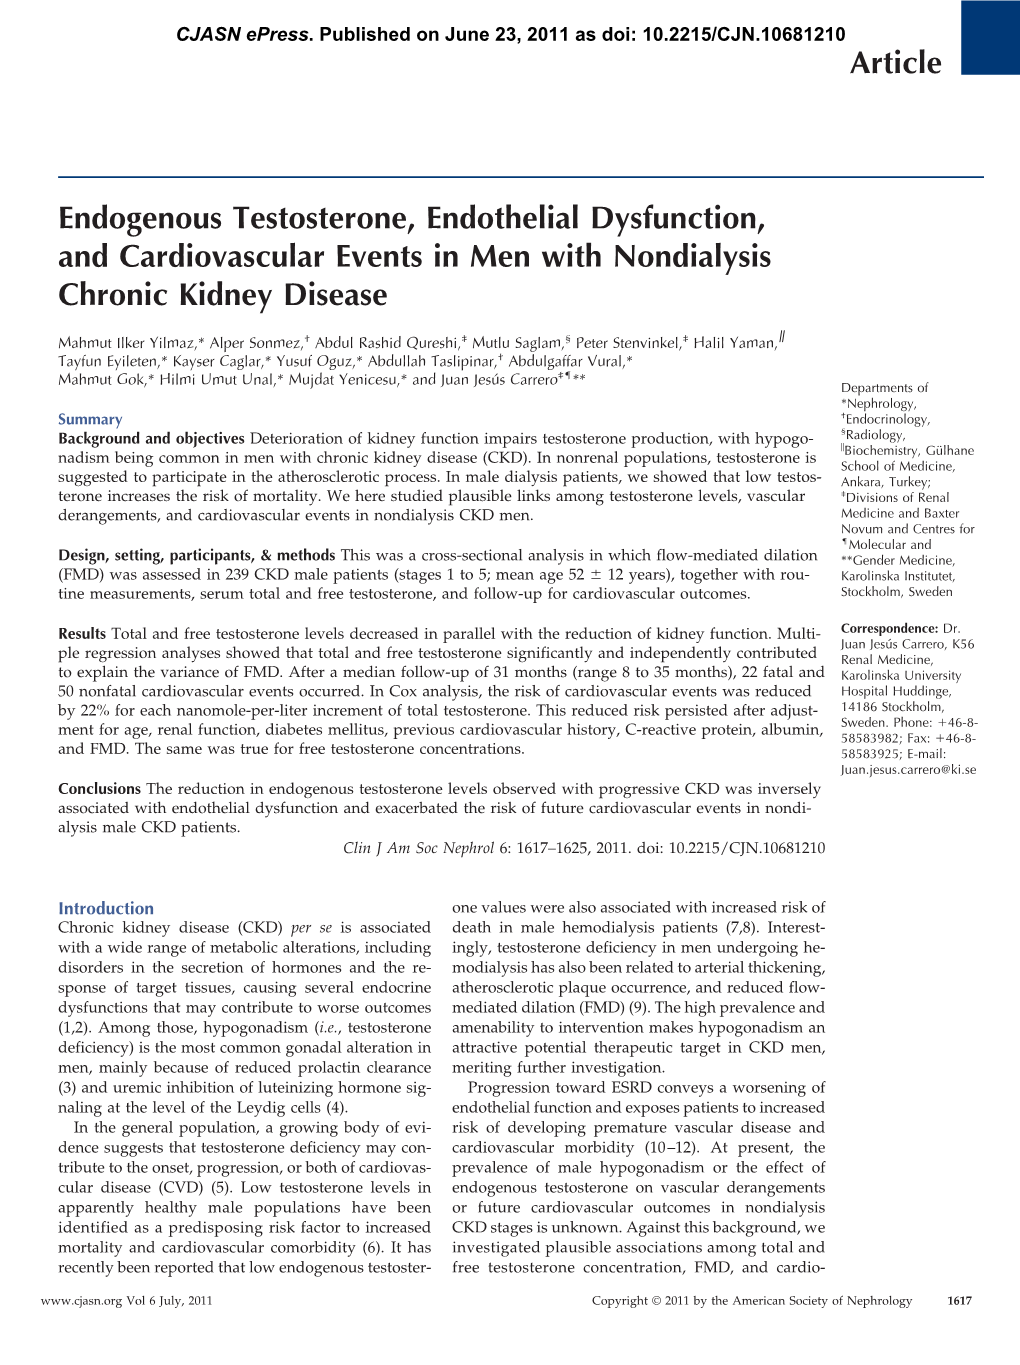 Endogenous Testosterone, Endothelial Dysfunction, and Cardiovascular Events in Men with Nondialysis Chronic Kidney Disease